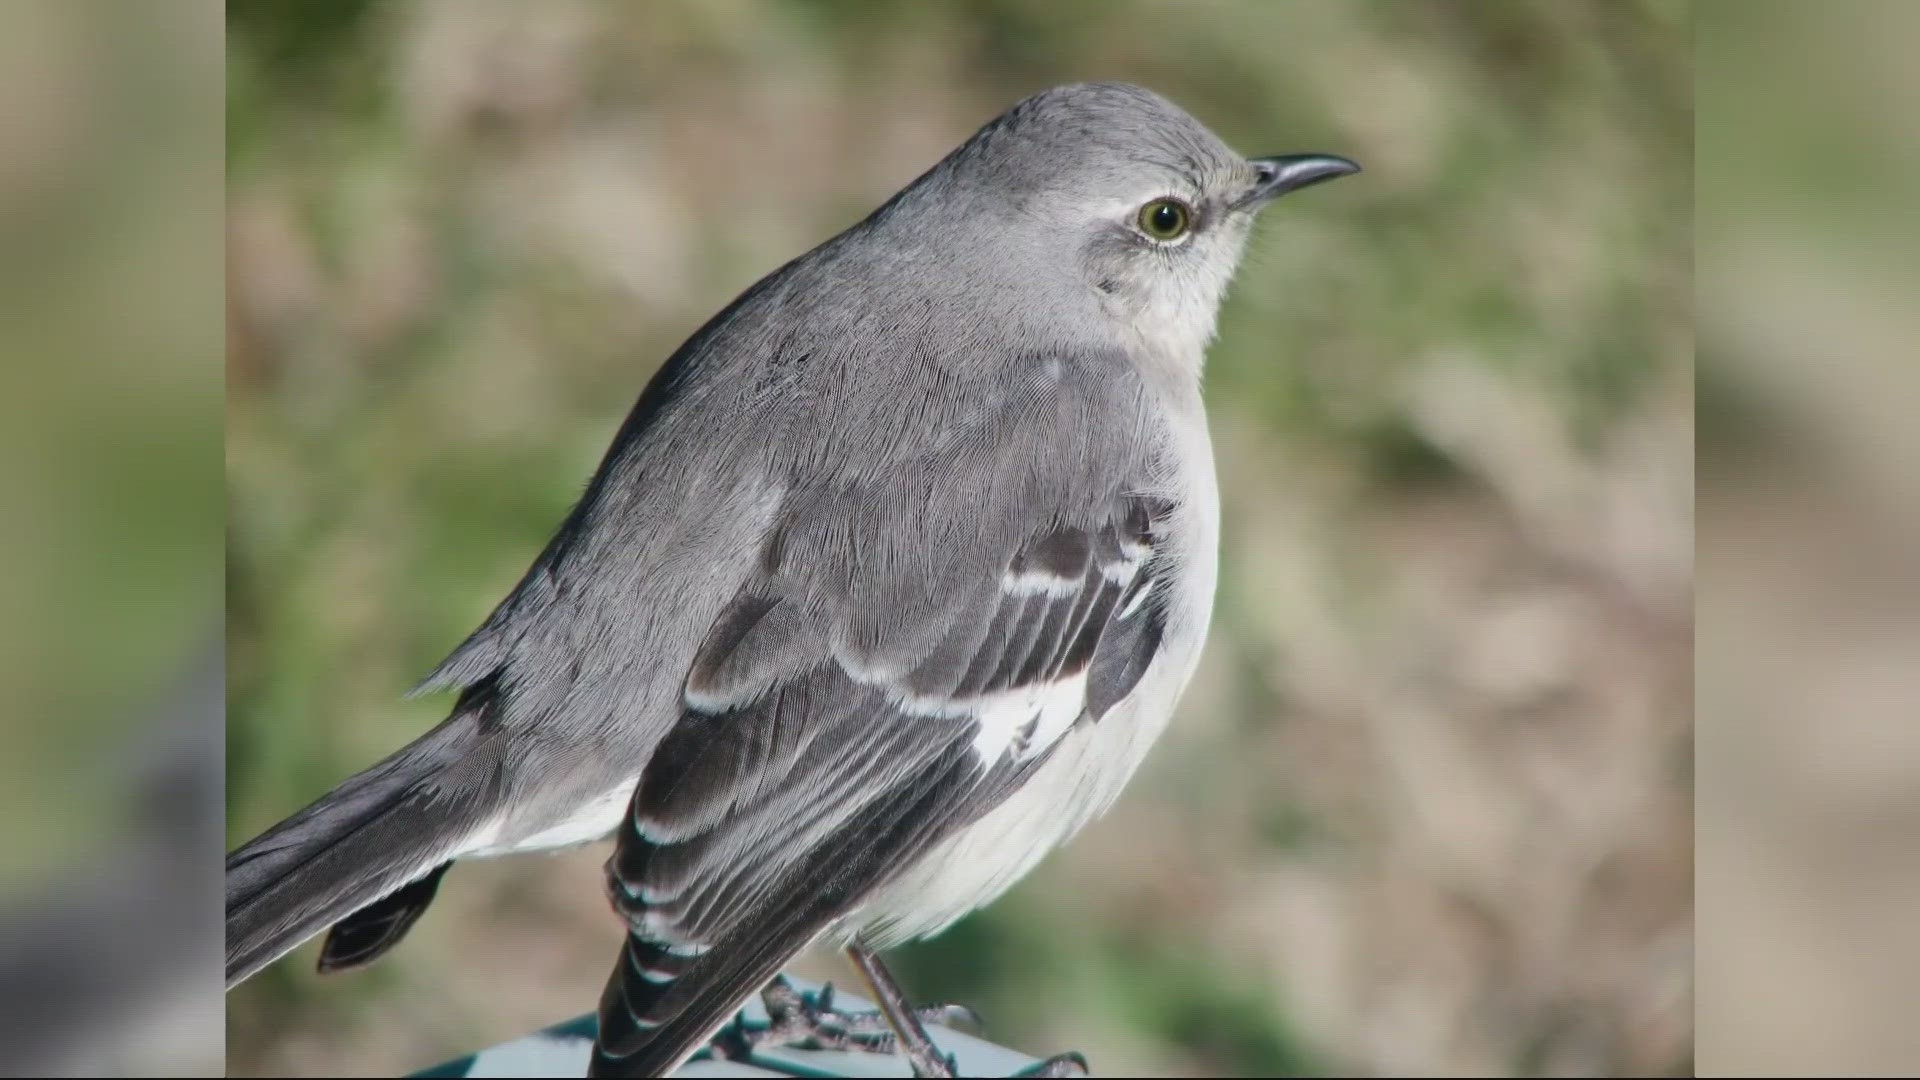 The northern mockingbird may not be Florida's state bird for long.